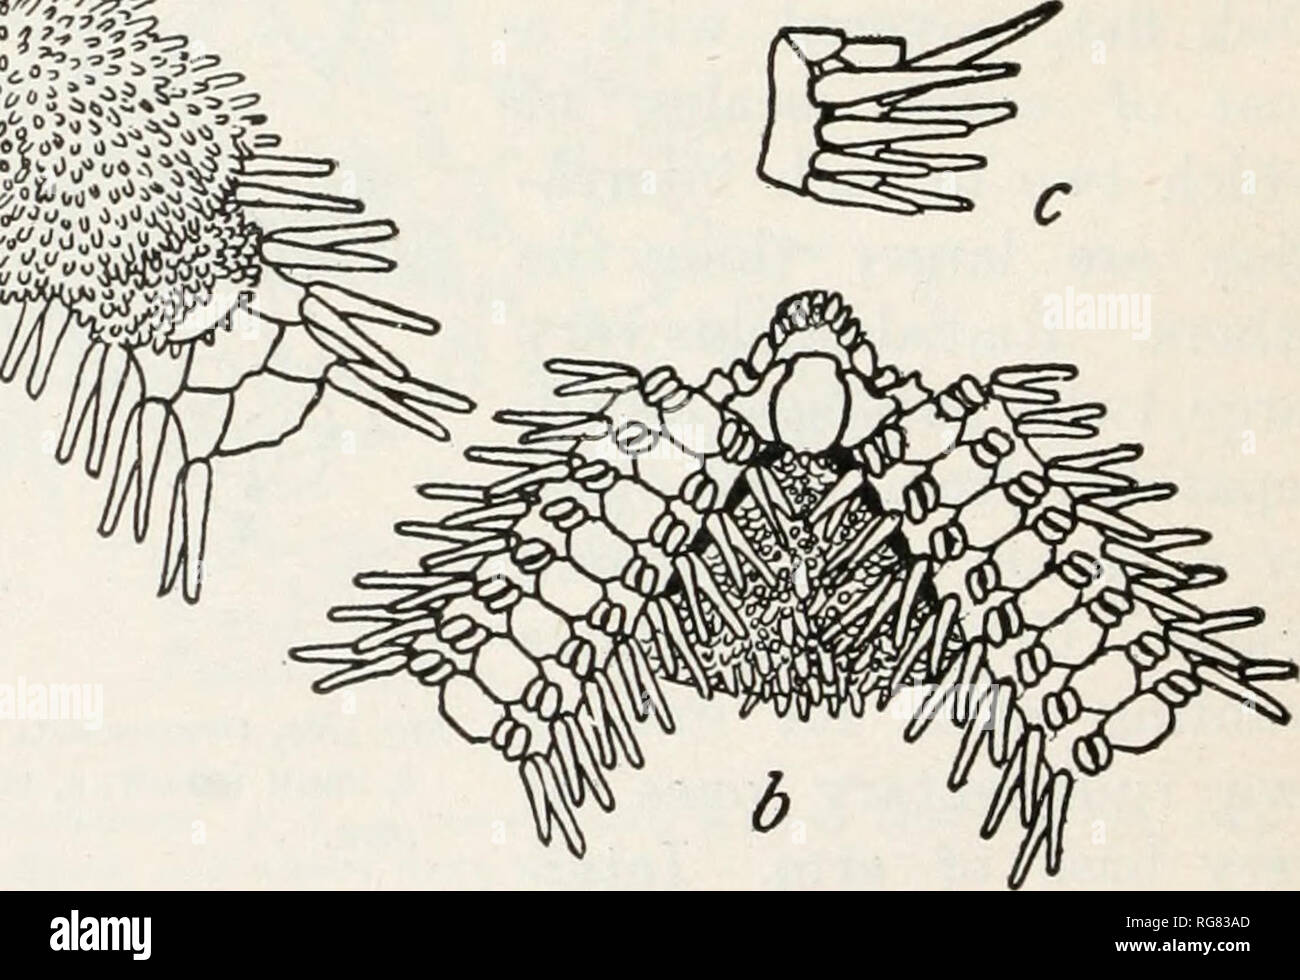 . Bulletin - United States National Museum. Science. Fig. 126.—Ophiomastix mixta, x 3. a, from above; 6, from below; c, side view of two arm JOINTS NEAR DISK. been figured, so it seems worth while to illustrate its principal features here. The specimen before me has three tentacle scales on each of the basal arm pores, but this is not characteristic of the species. OPHIOCOMA BREVIPES. 0-phiocoma hrevipes Peters, Arch. f. Naturg., vol. 18 (1), 1852, p. 85. Locality.—Tanegashima, Japan, 1906, 6 specimens. The disk diameter of these individuals ranges from 8 to 27 mm. The smallest has some white  Stock Photo